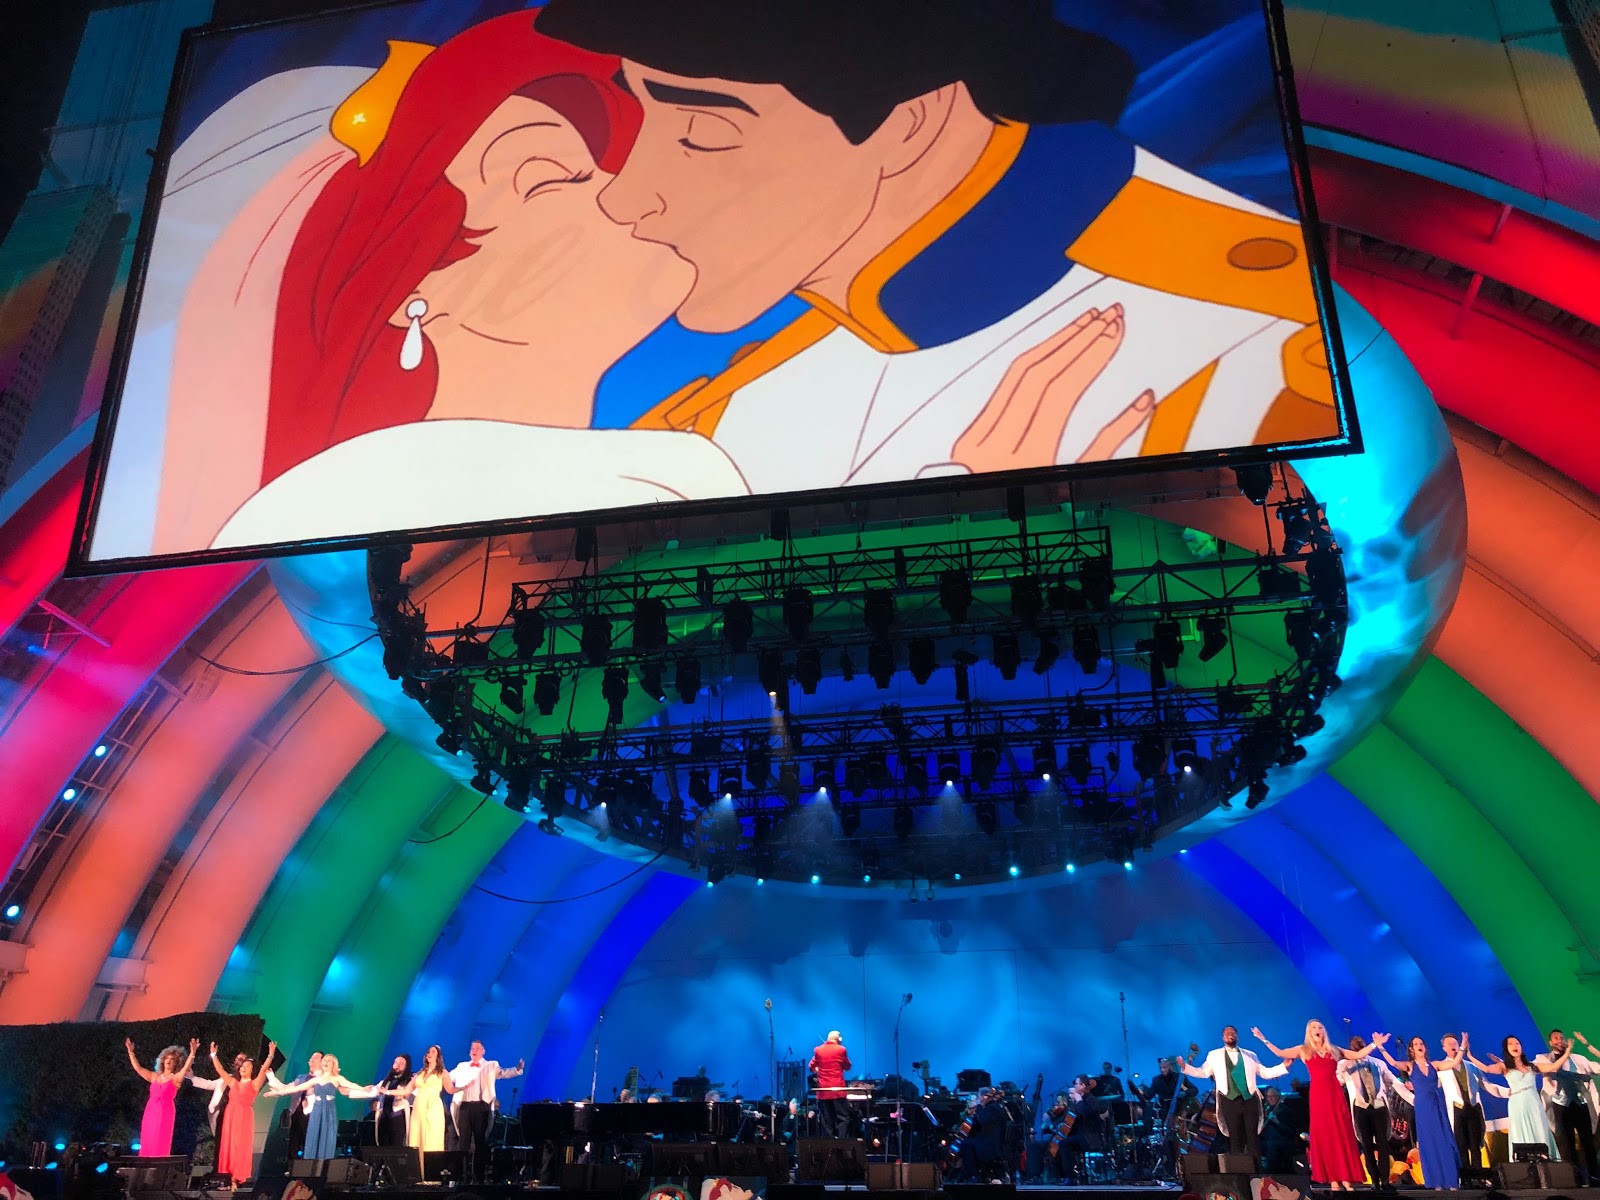 Review: "The Little Mermaid" Live-to-Film Concert Experience at the Hollywood Bowl ...